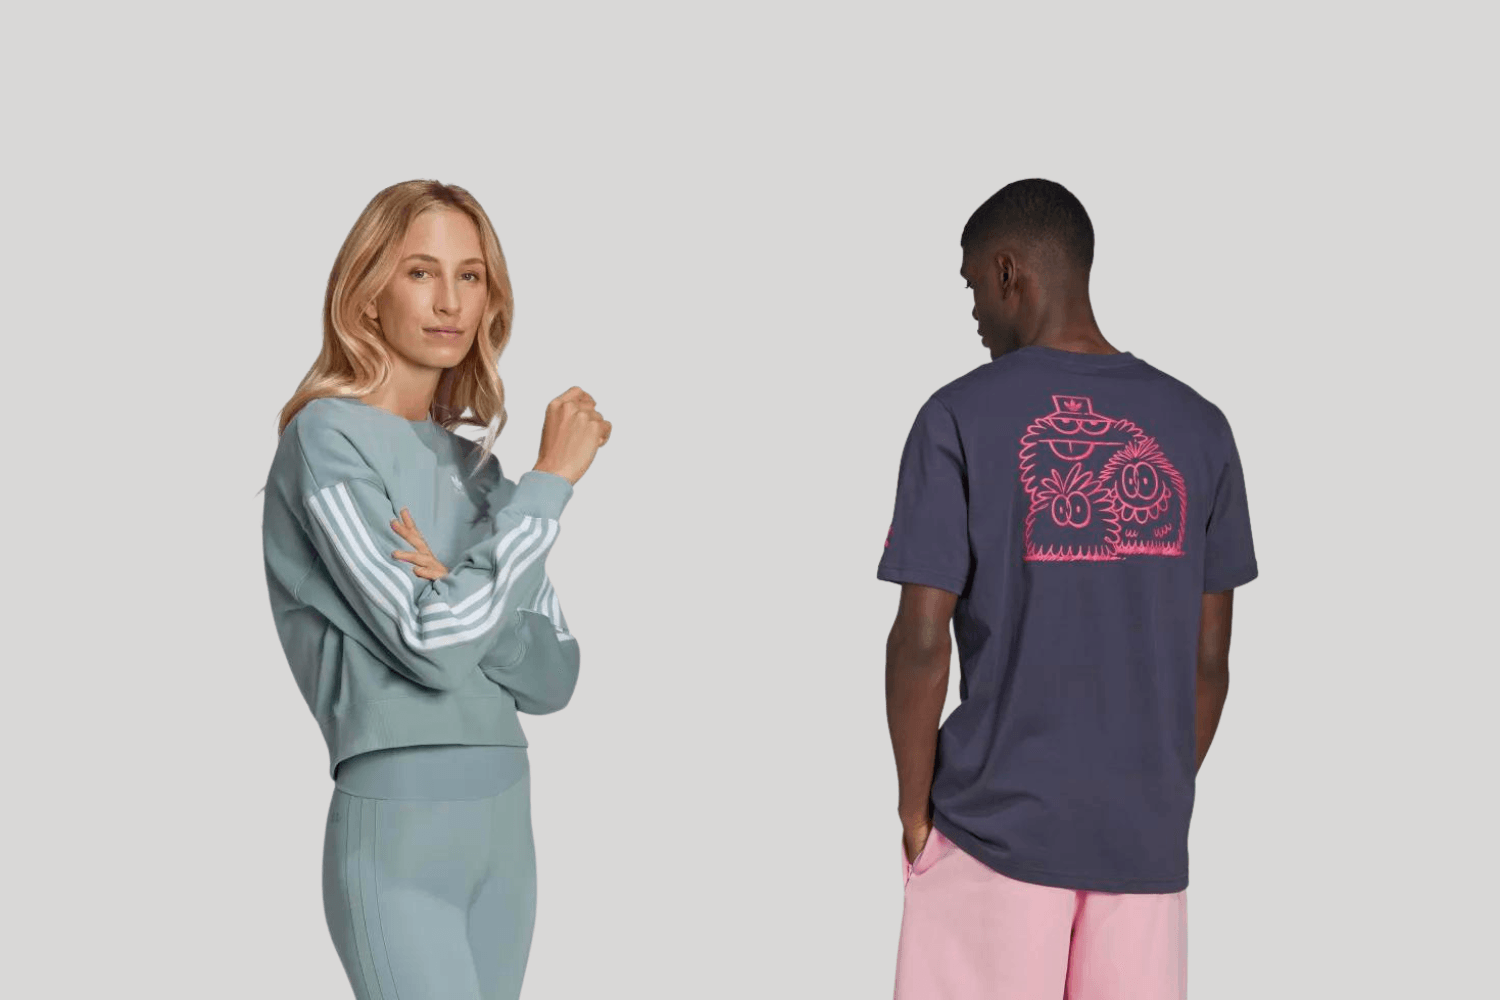 The adidas End Of Season Sale has started